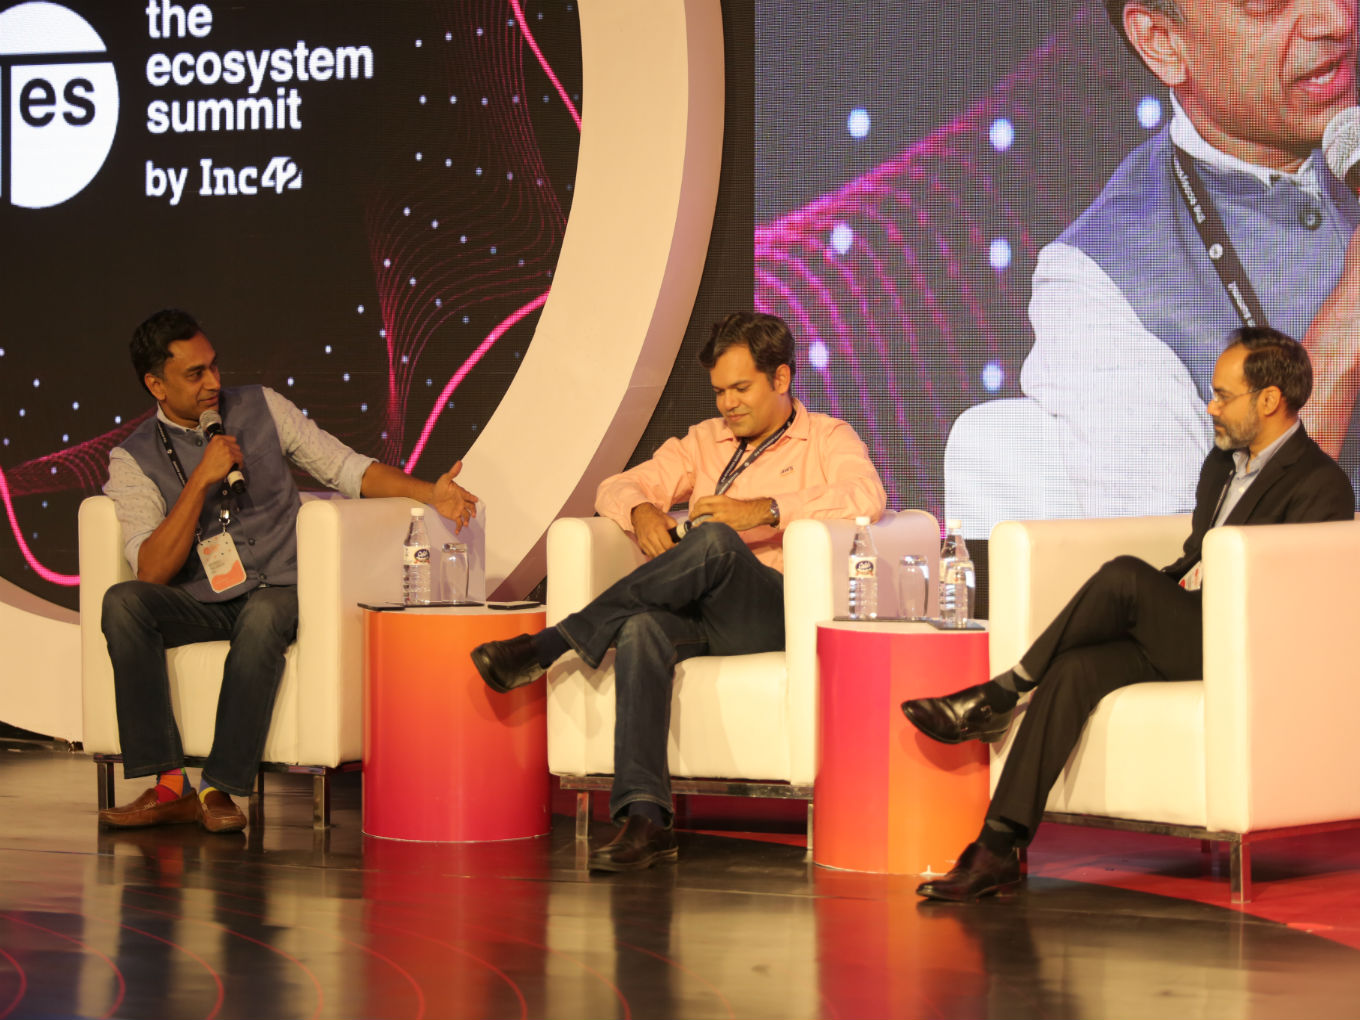 Advice To Indian Startups And Corporates: Make Innovation, Not War